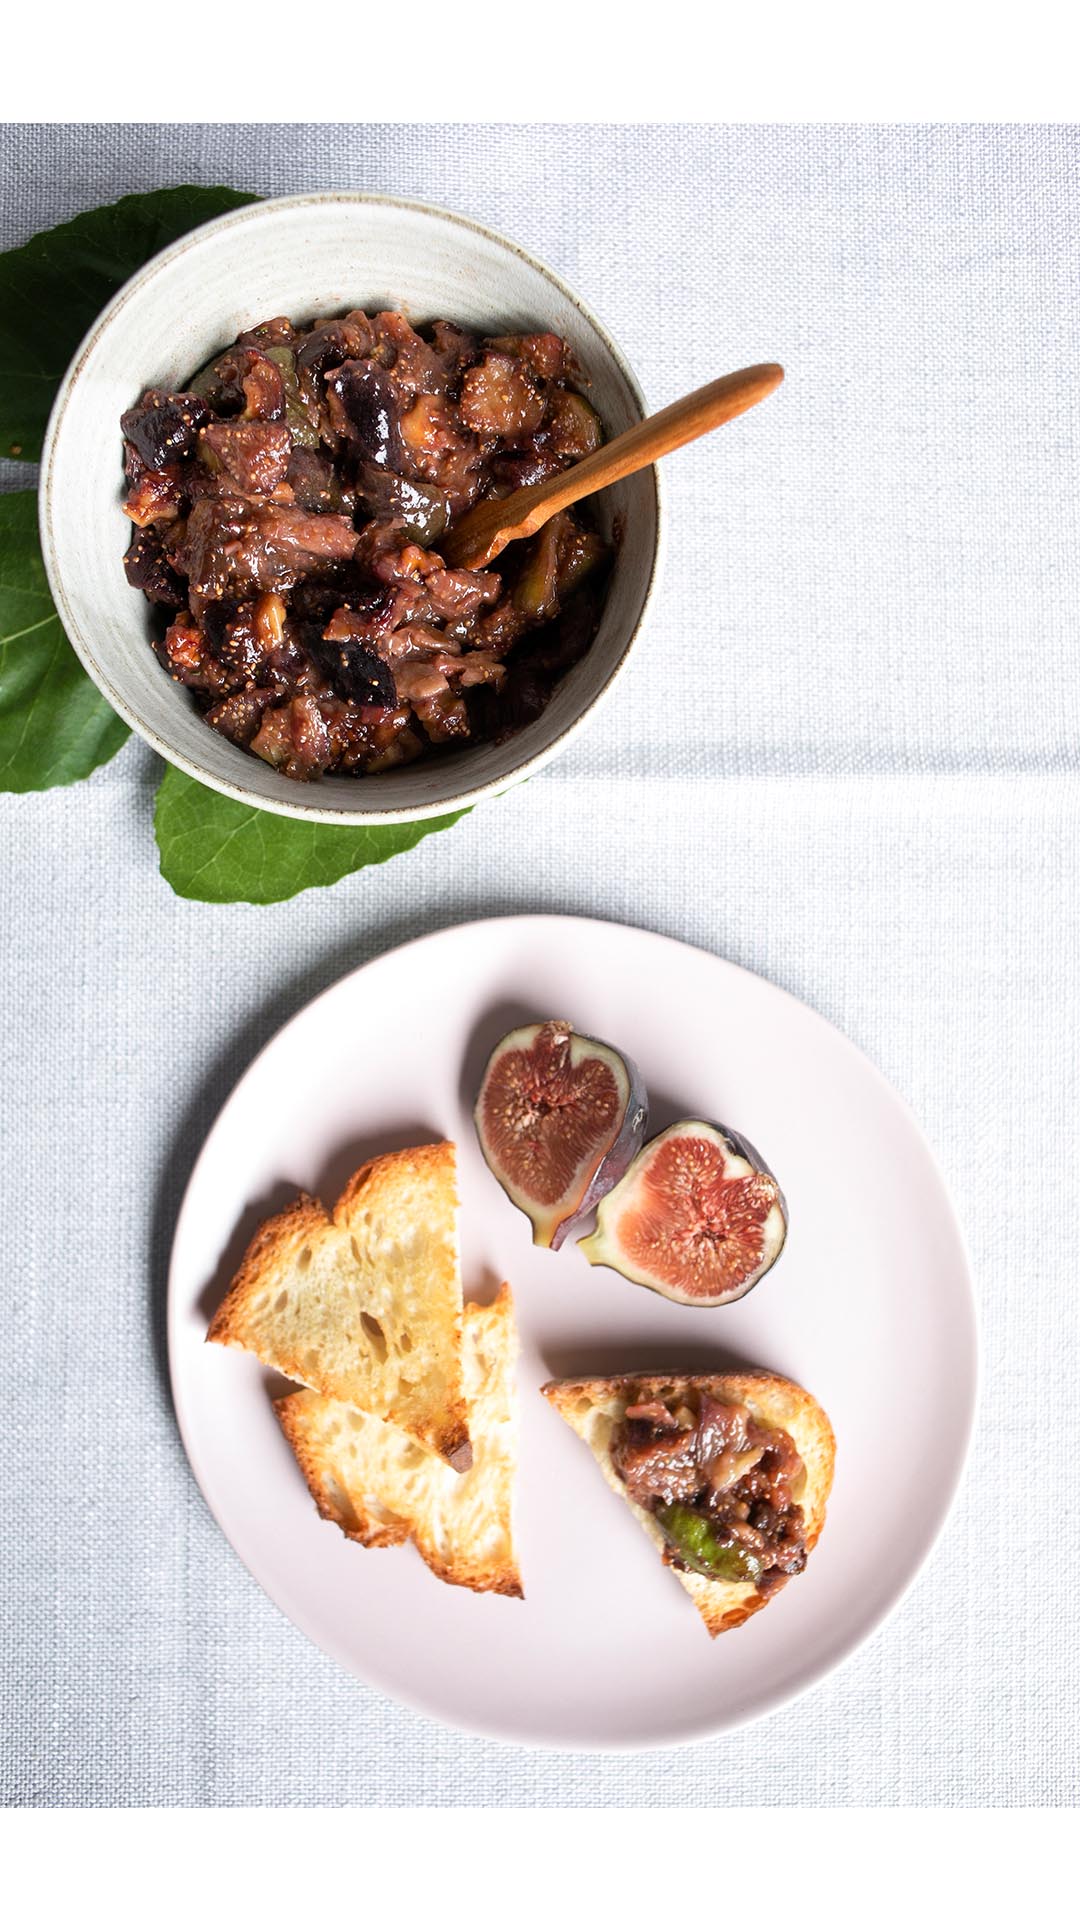 During fresh fig season, make Joanne Weir's warm fig spread recipe. Serve on a cheese board with dried figs or for dessert with ricotta and honey.